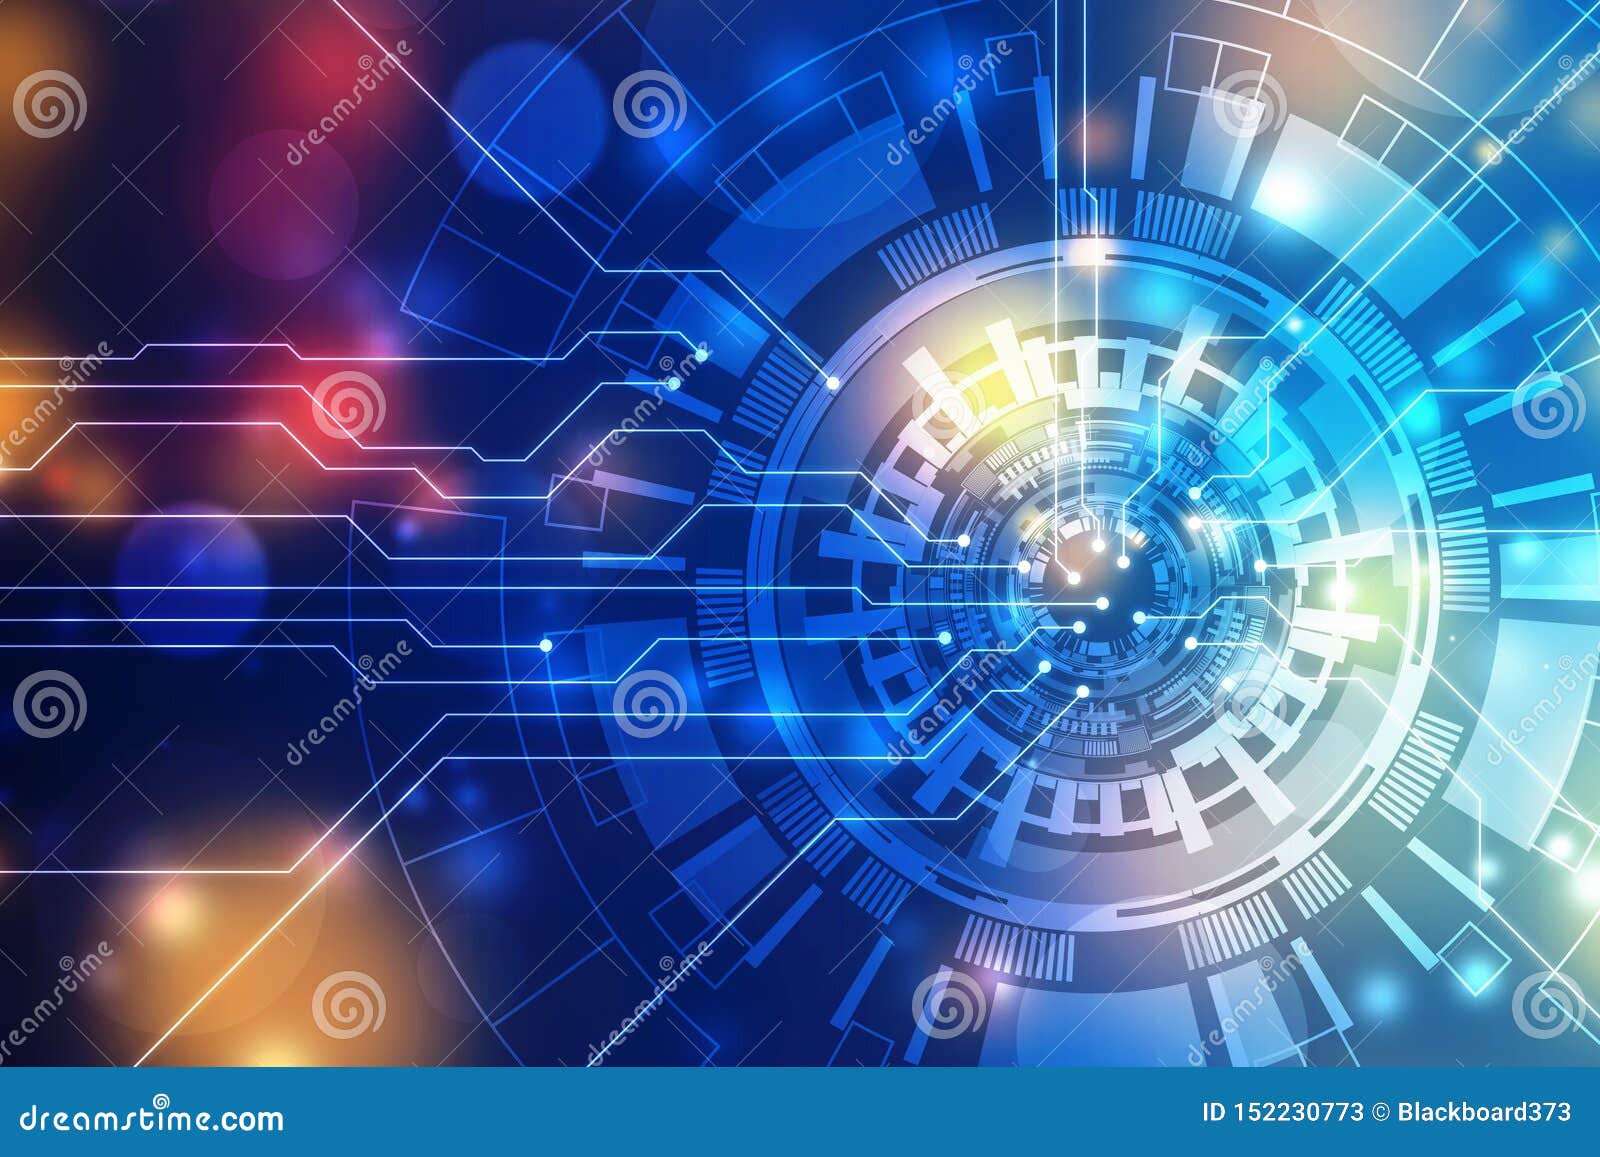 Technical Abstract Technology Background With Geometric Shape Blue  Technology Abstract Background Image for Free Download